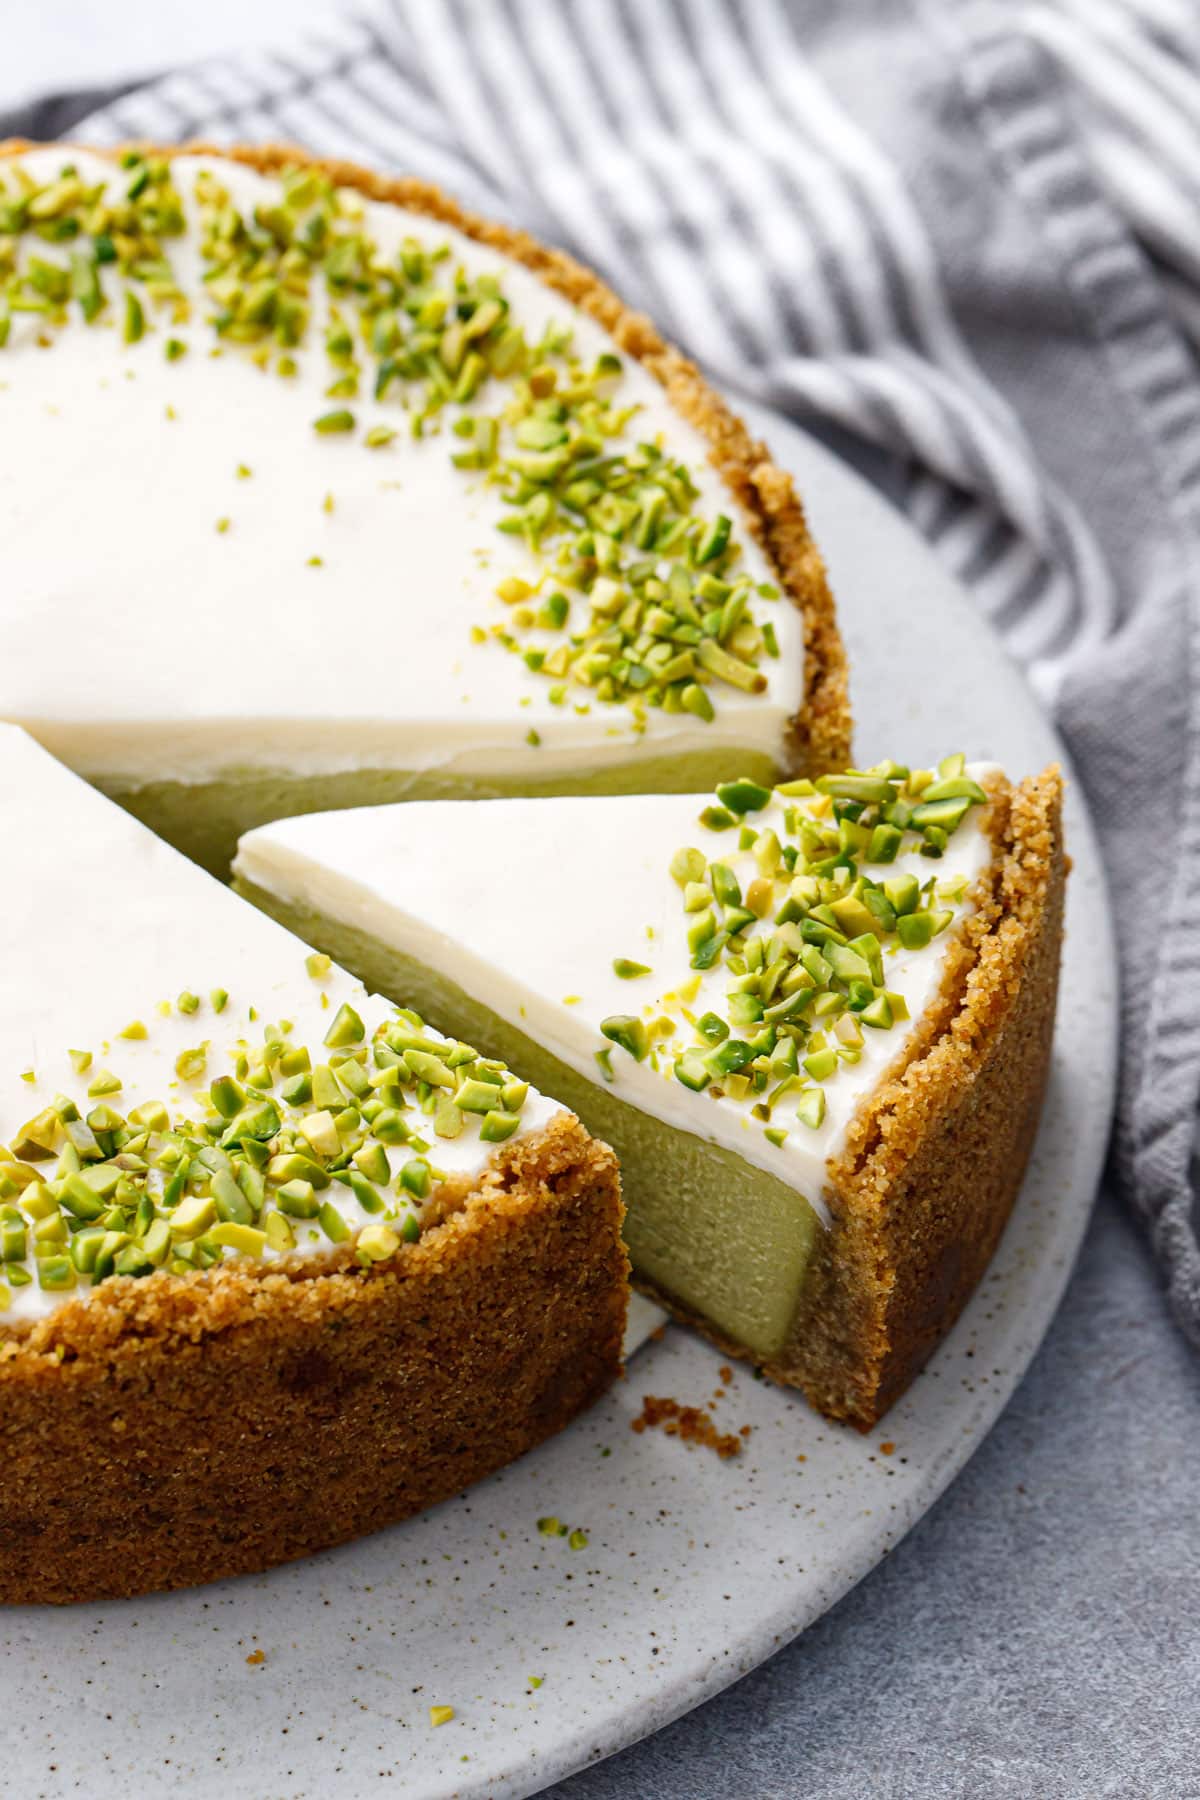 Slice of Pistachio Sour Cream Cheesecake on a flat cake plate, slice pulled out slightly to show the green-tinted filling.